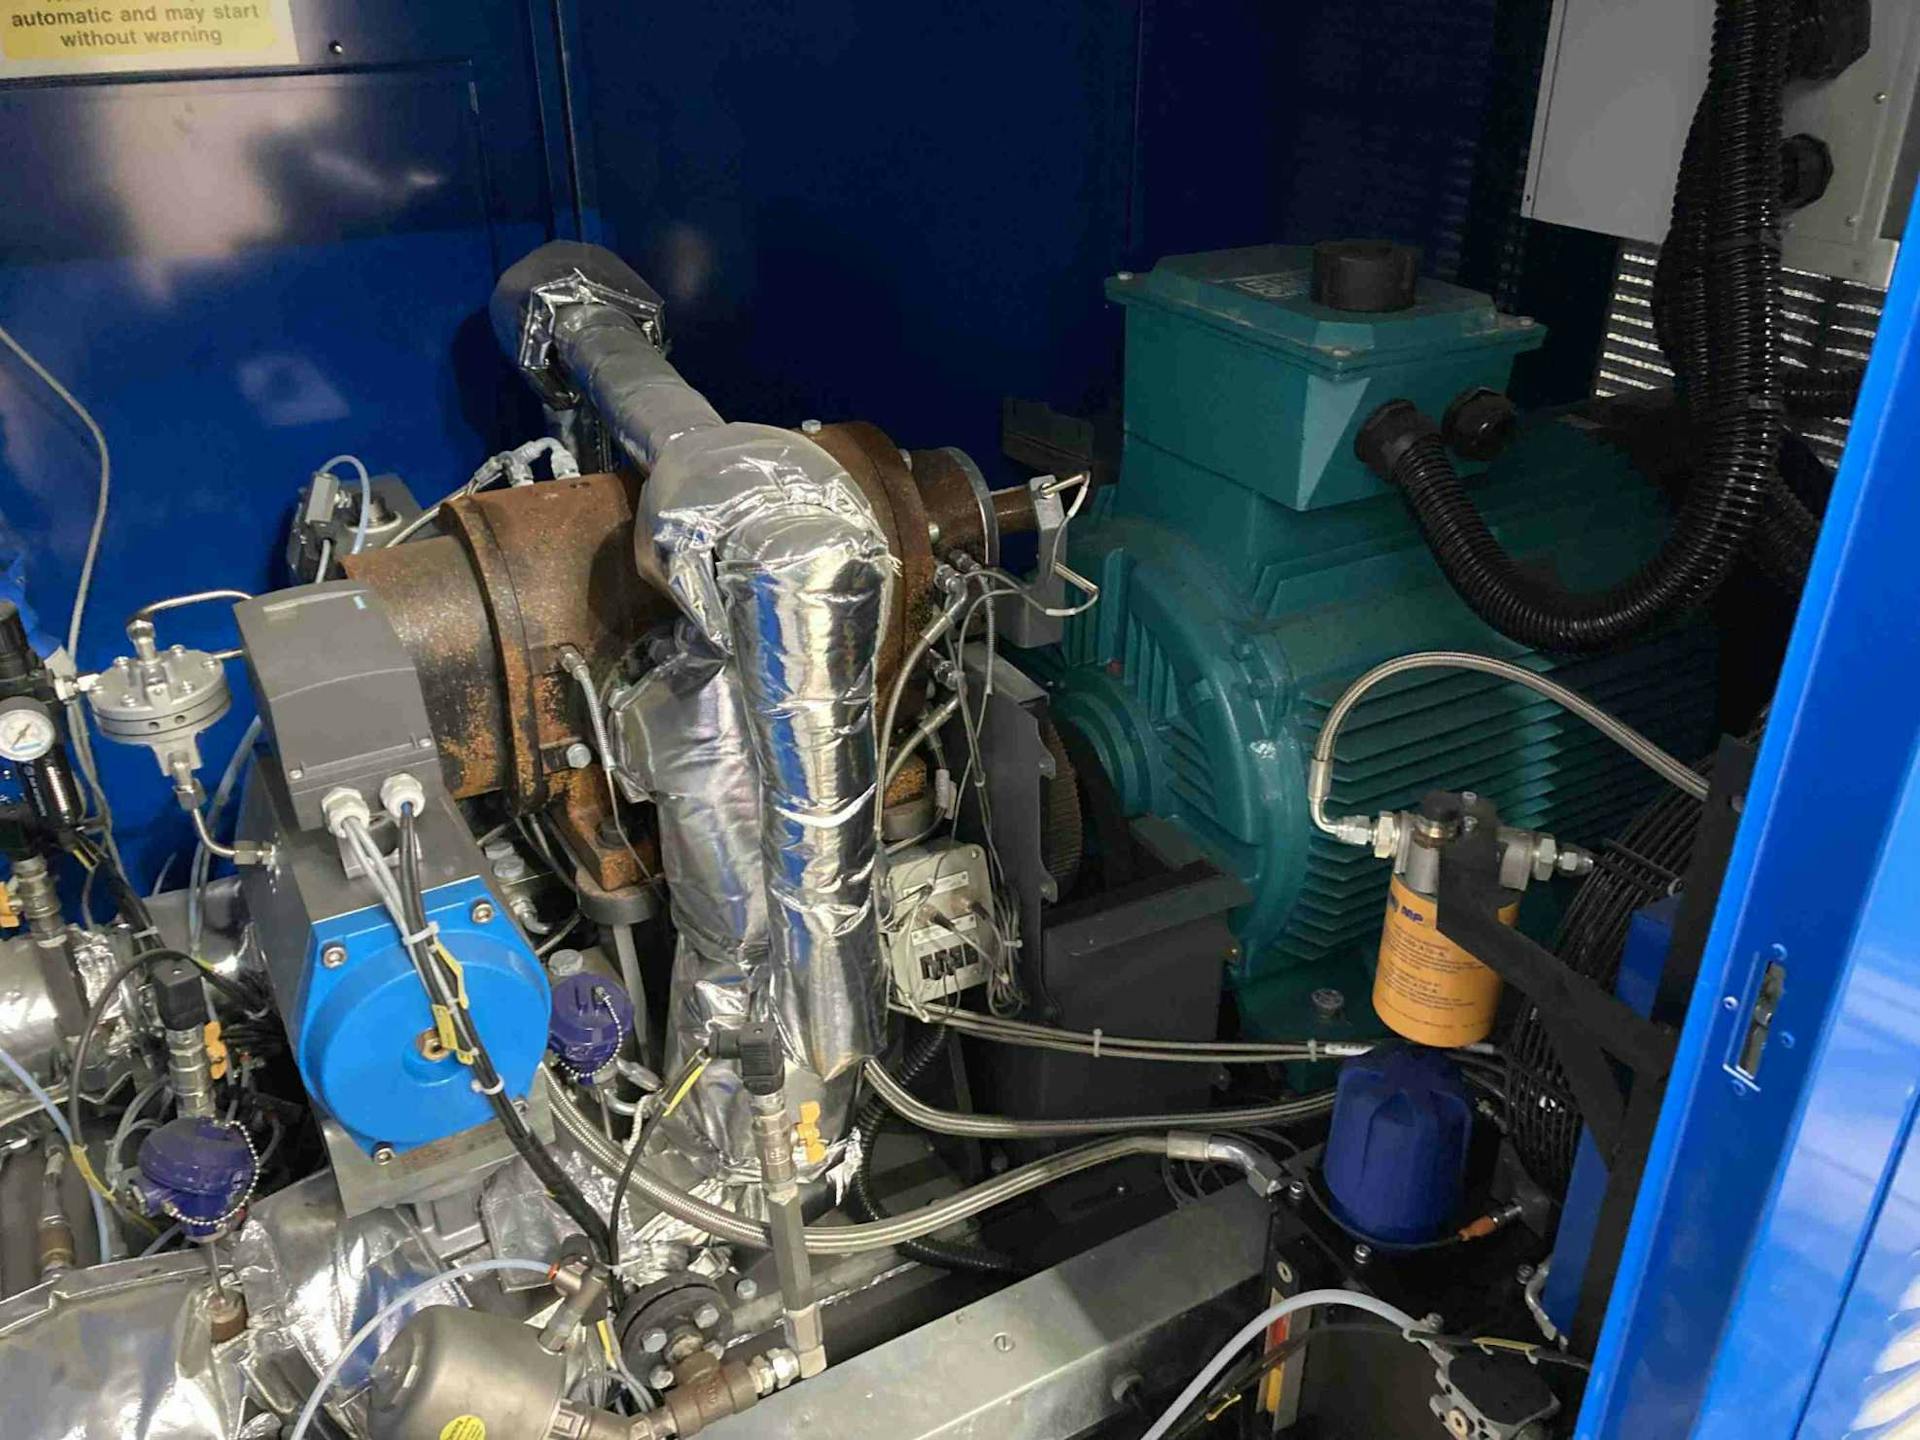 Heliex GenSet 7Photo of Heliex steam expander generator set showing interior workings - organic rankine cycle orc turbine for sale